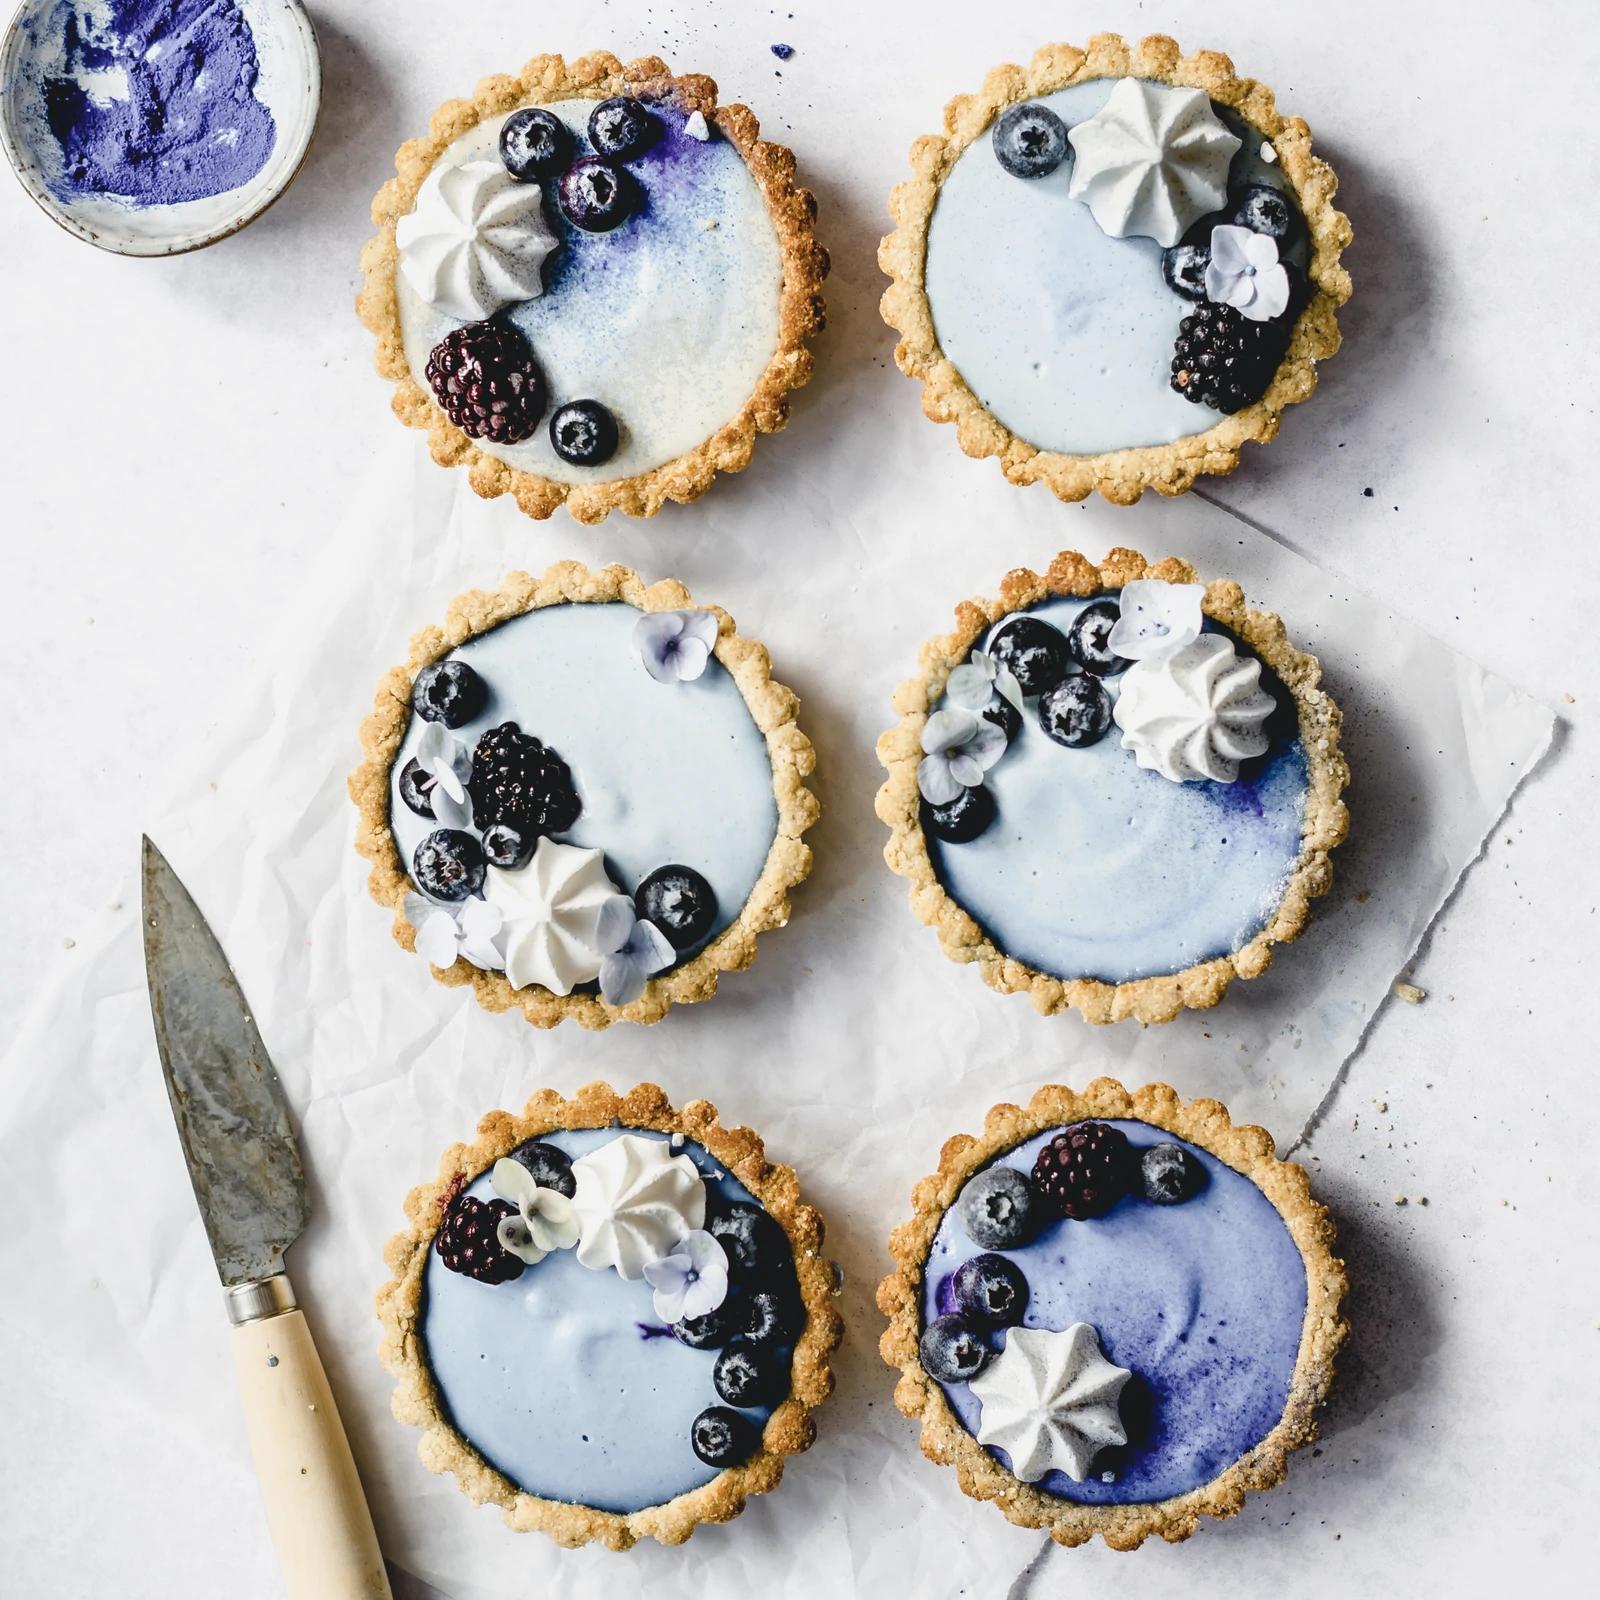 Gluten-free CocoCash Tartlets made with leftover Almond Cow pulp